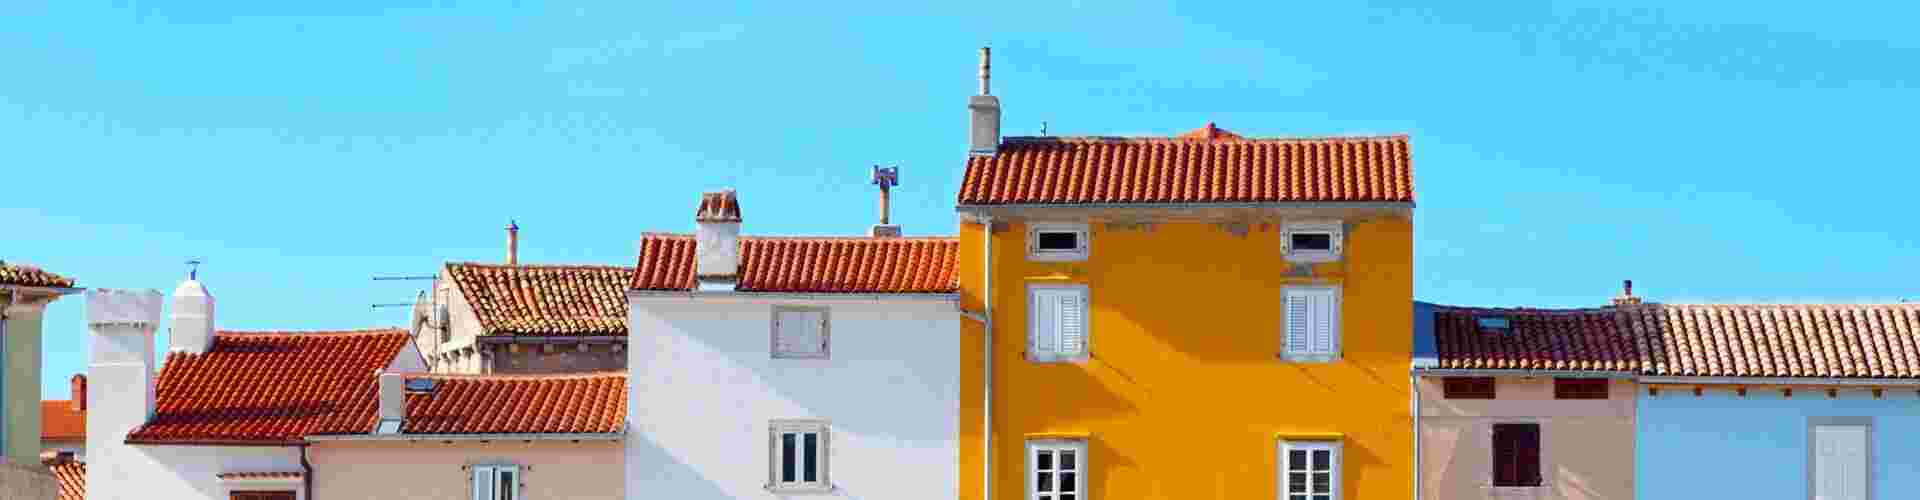 Coloured buildings and blue sky in Cres, Croatia